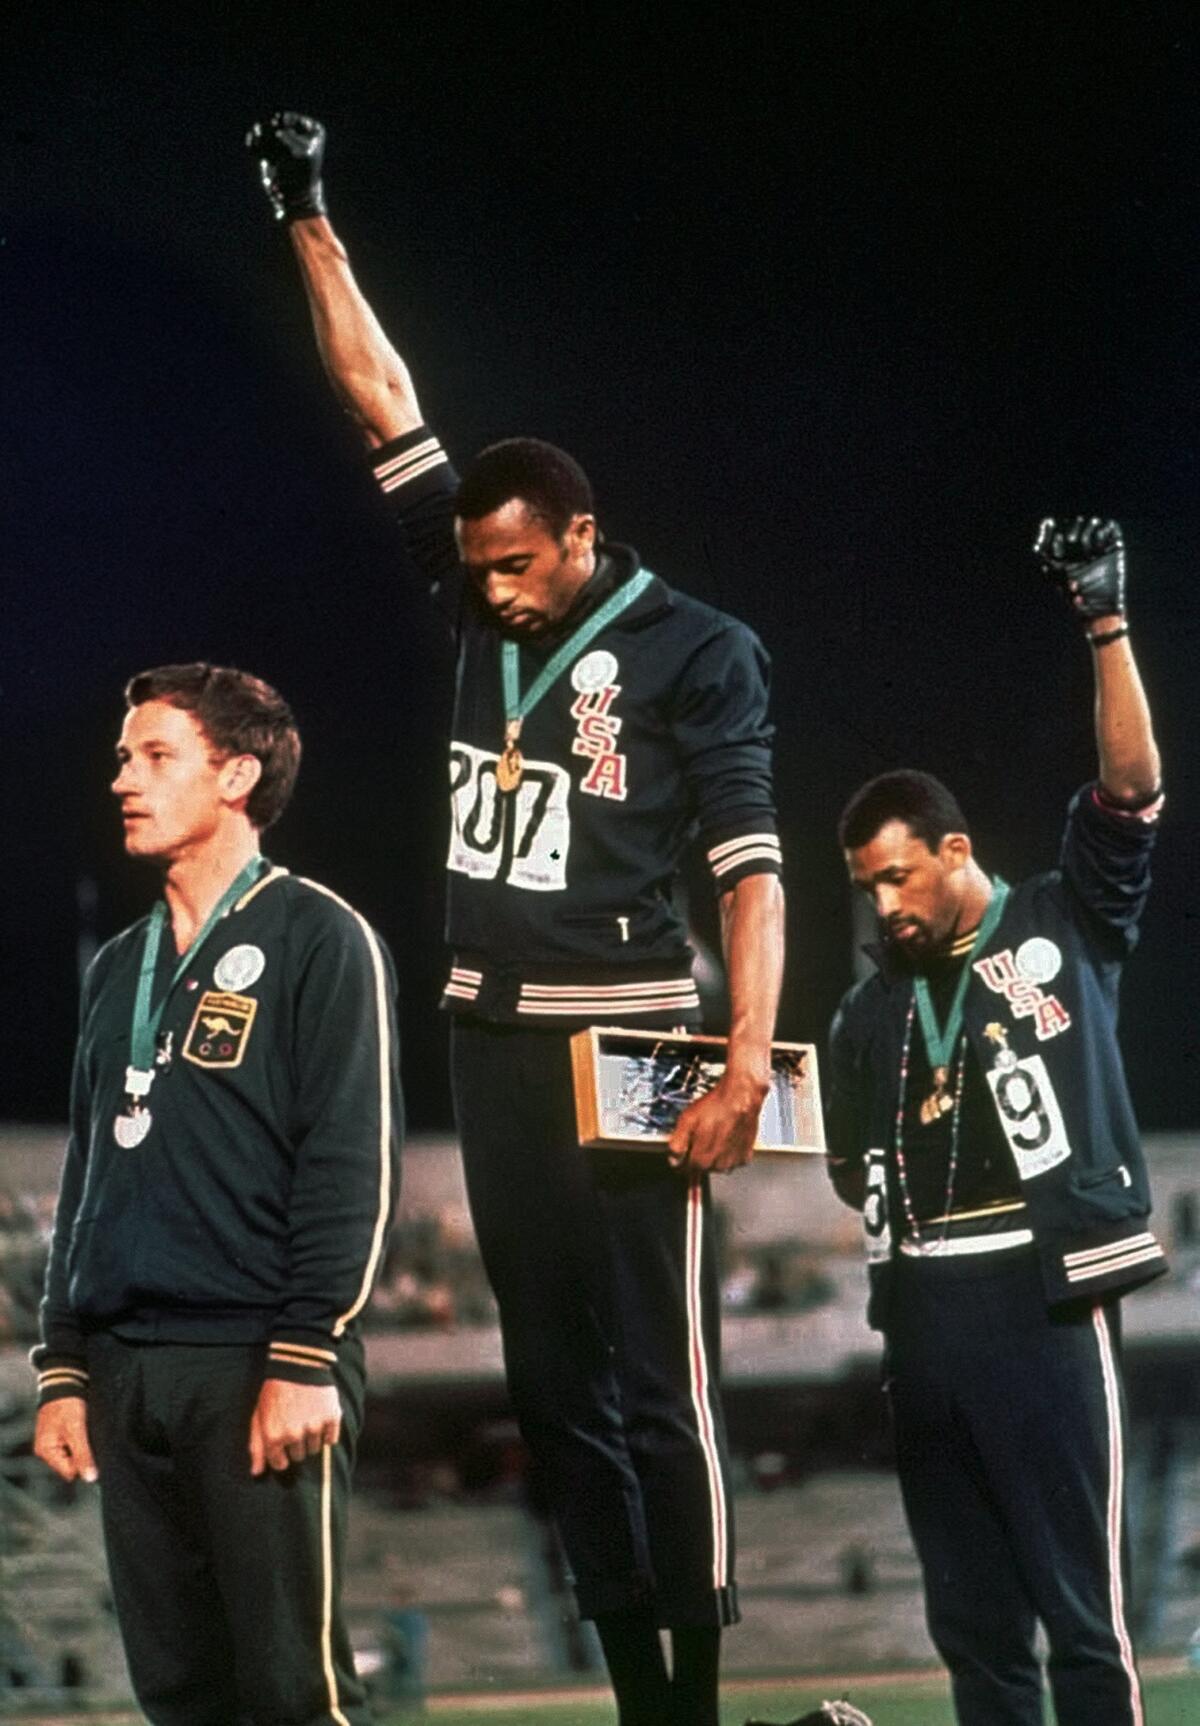 U.S. athletes Tommie Smith, center, and John Carlos stare downward while extending gloved hands skyward in 1968 